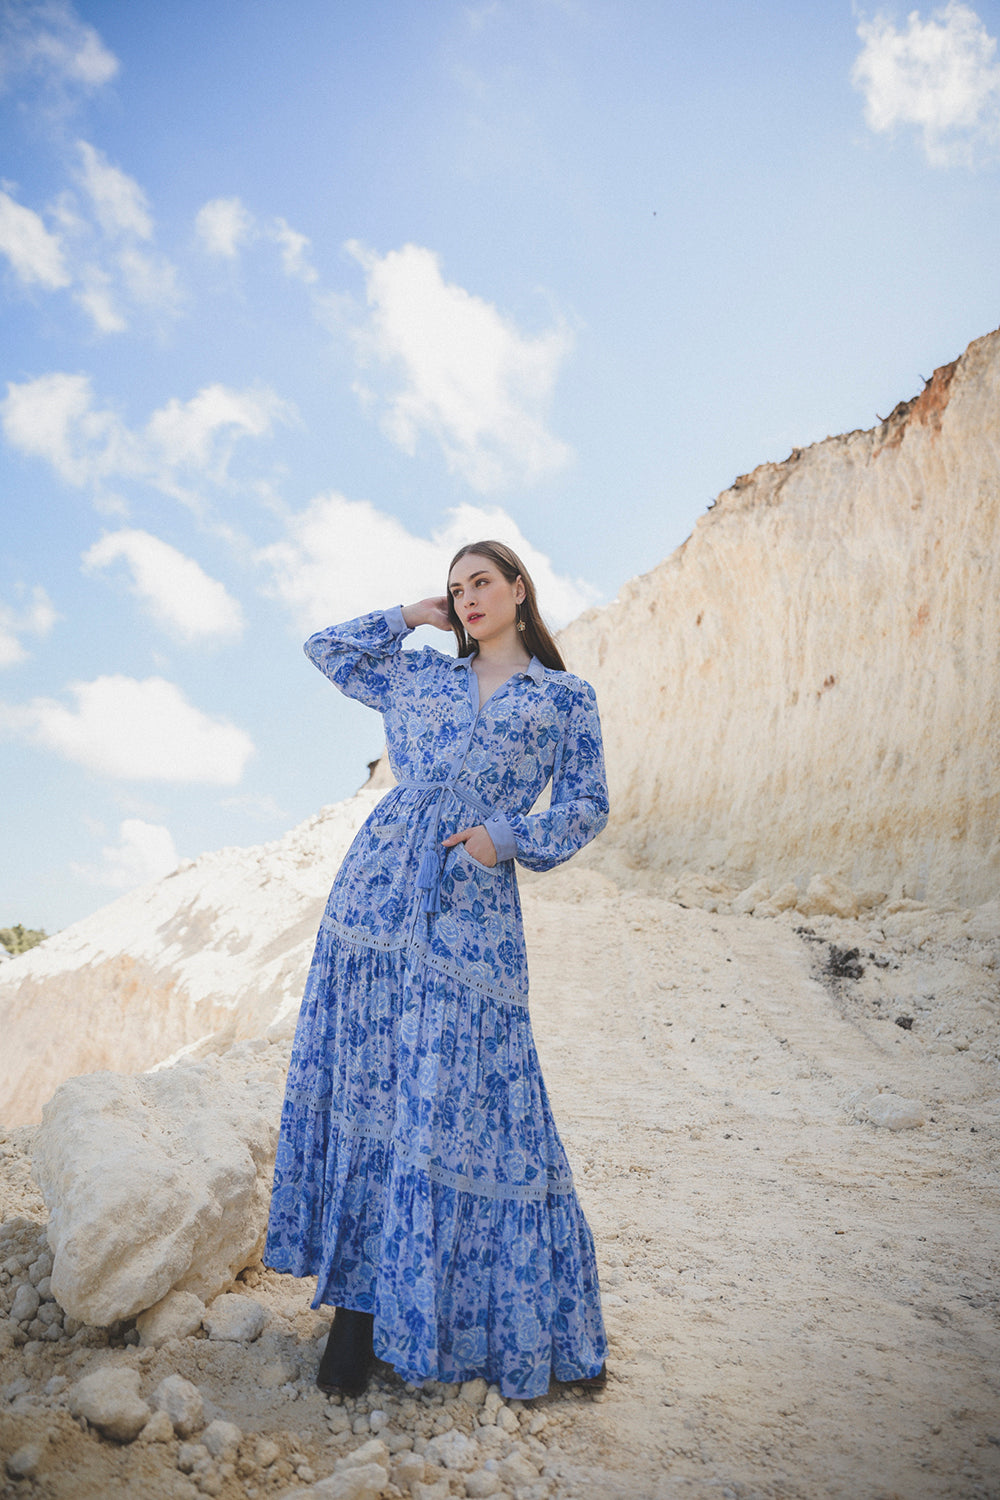 Indulge in the artisanal beauty of Peony, a collection by Tulle and Batiste, where modern boho-inspired designs meet ethical craftsmanship from Balinese artisans